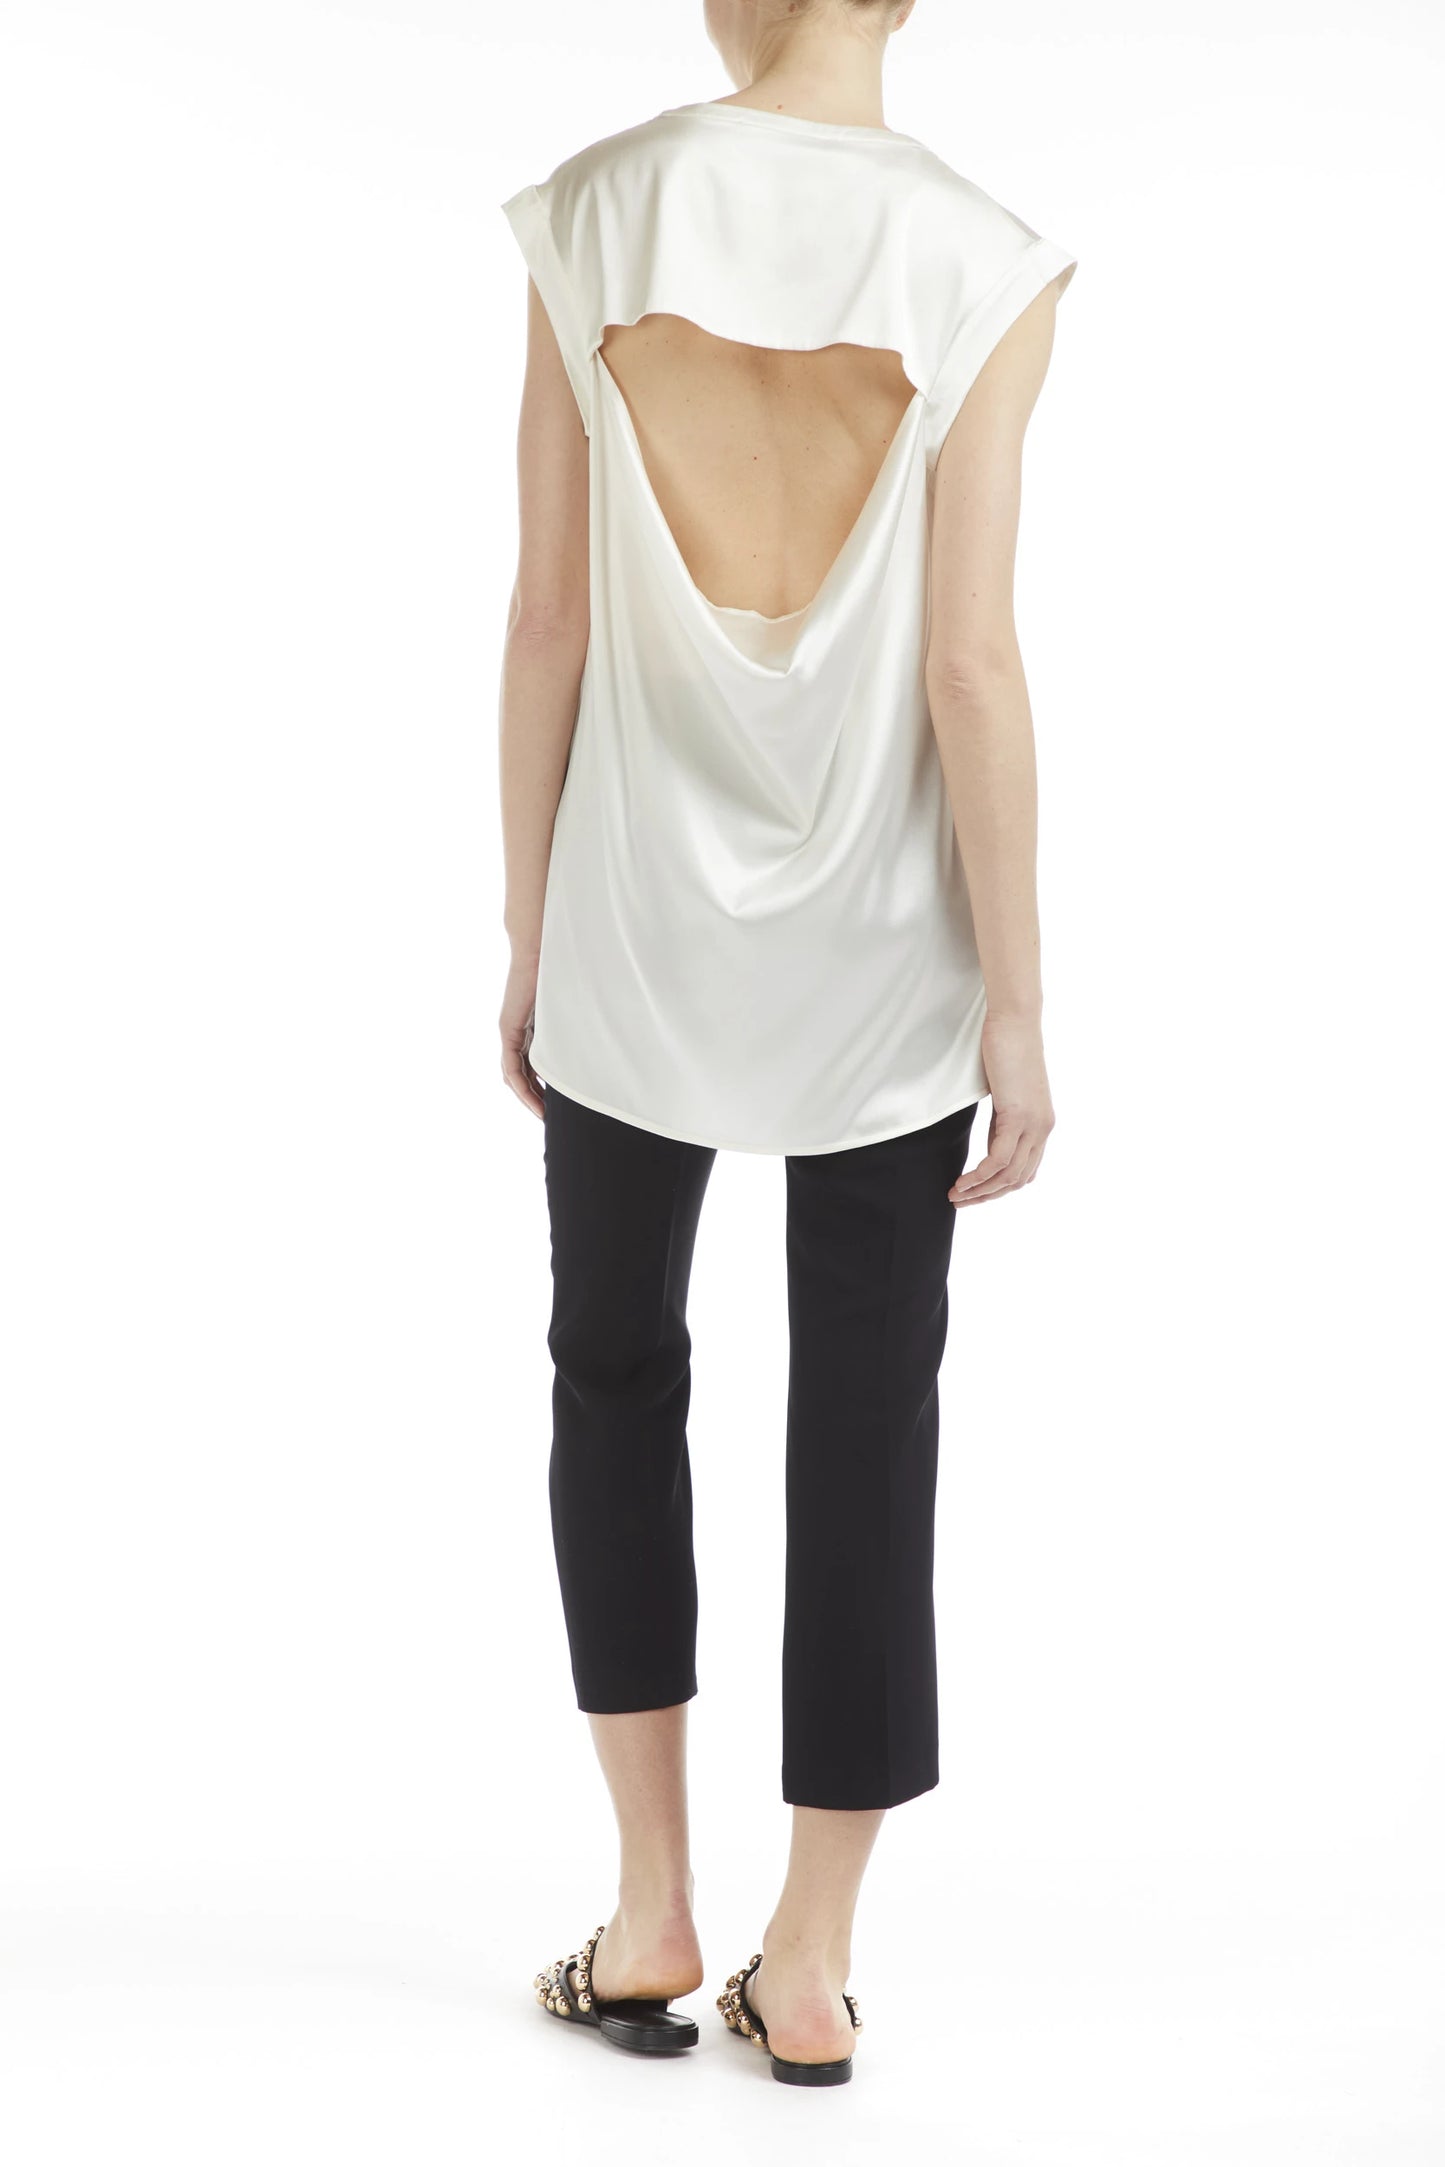 Tank Top With Neckline Draped Behind